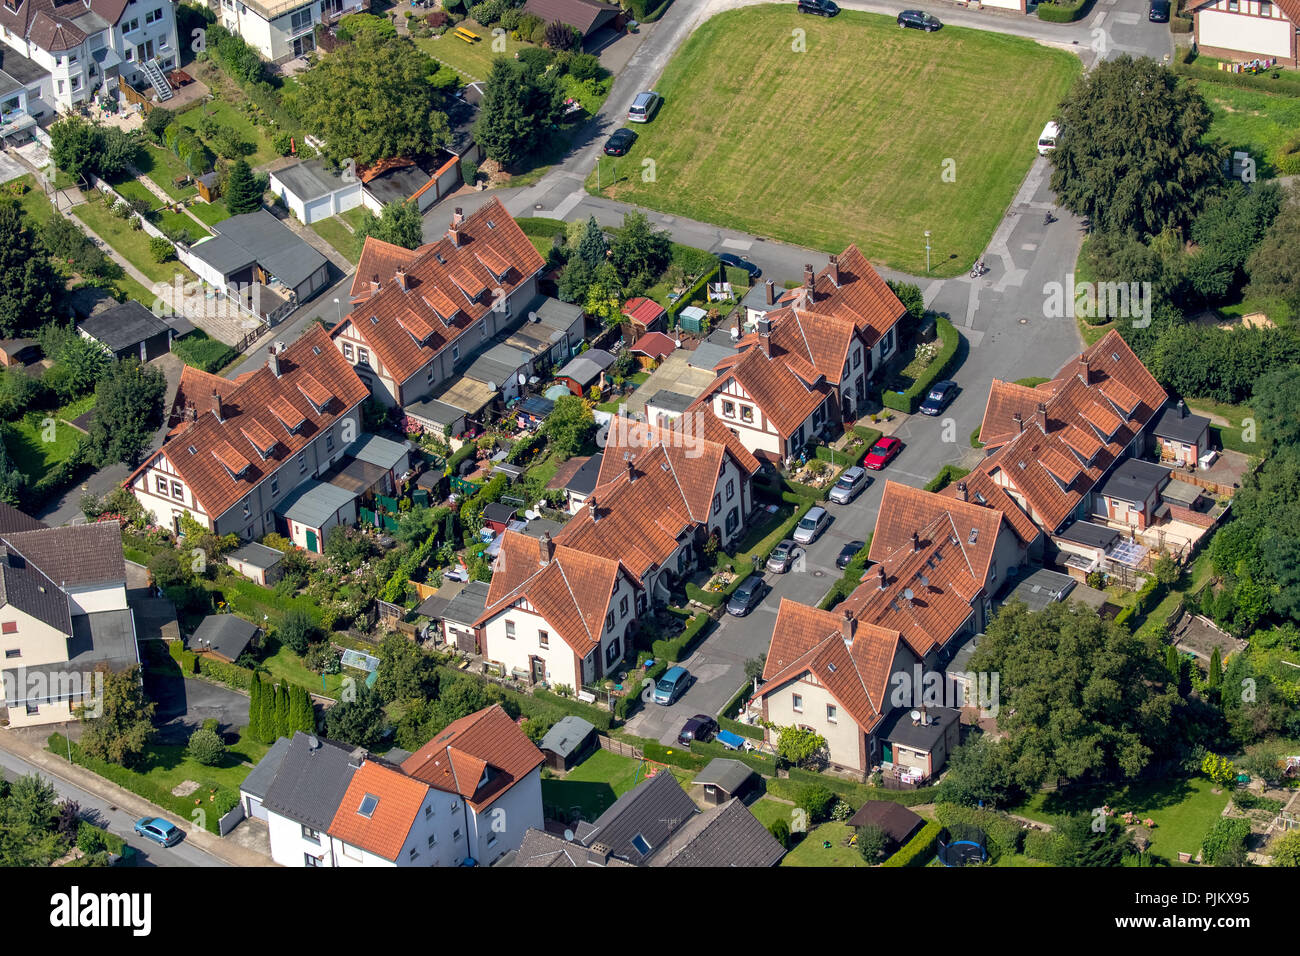 Müsendrei, workers' settlement with 24 semi-detached houses for the workers of the Henrichshütte, brick facades, plaster facades, Hattingen, Ruhr area, North Rhine-Westphalia, Germany Stock Photo